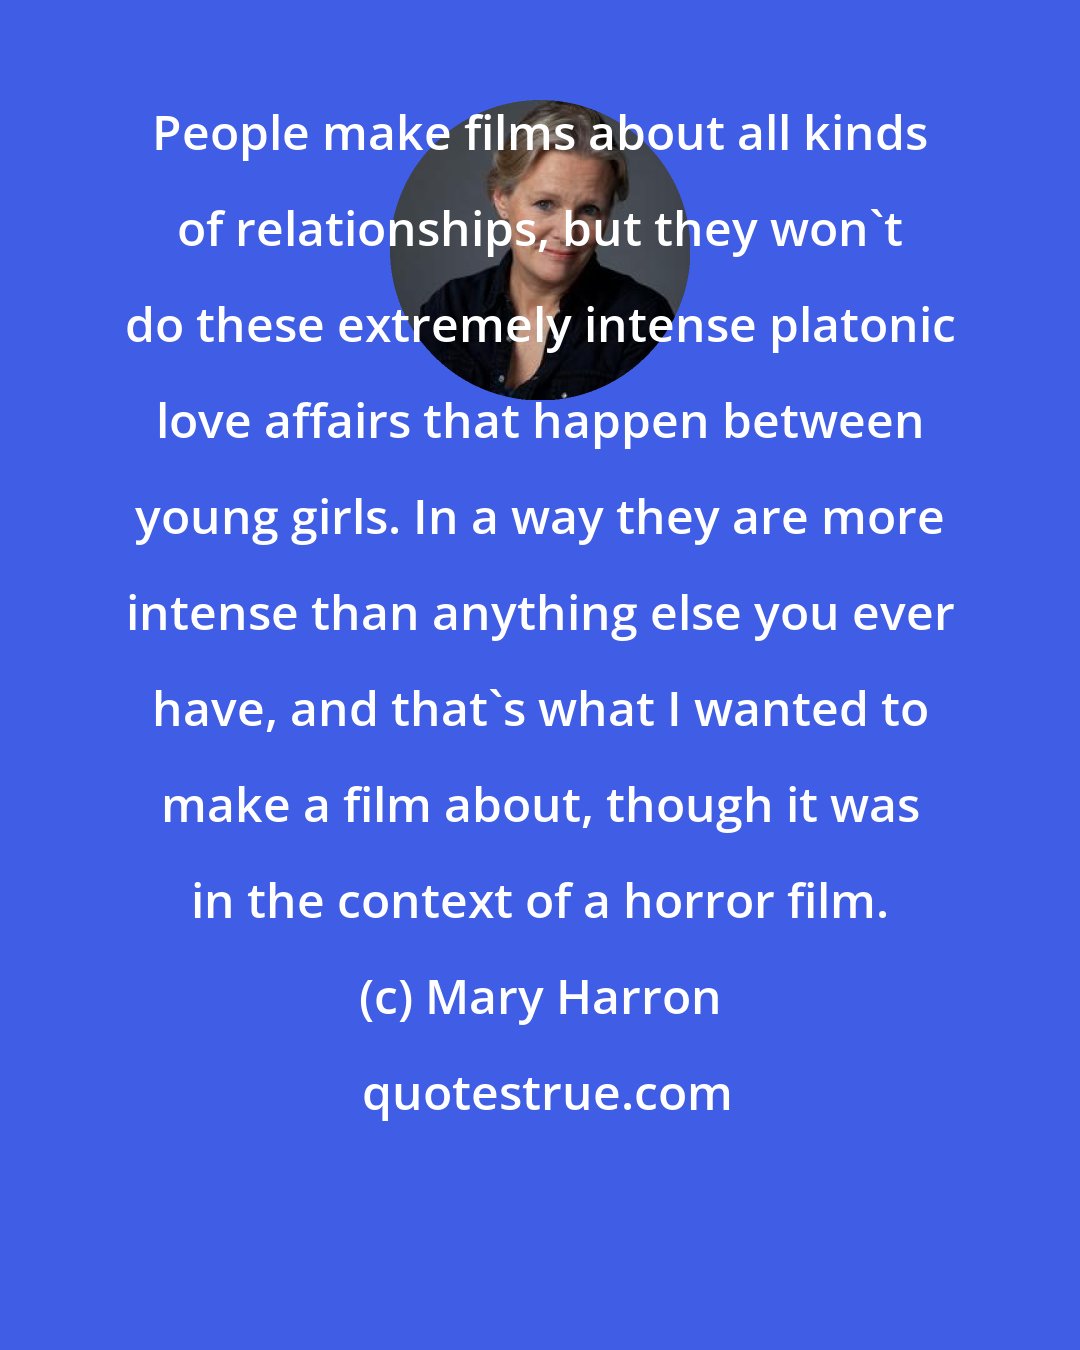 Mary Harron: People make films about all kinds of relationships, but they won't do these extremely intense platonic love affairs that happen between young girls. In a way they are more intense than anything else you ever have, and that's what I wanted to make a film about, though it was in the context of a horror film.